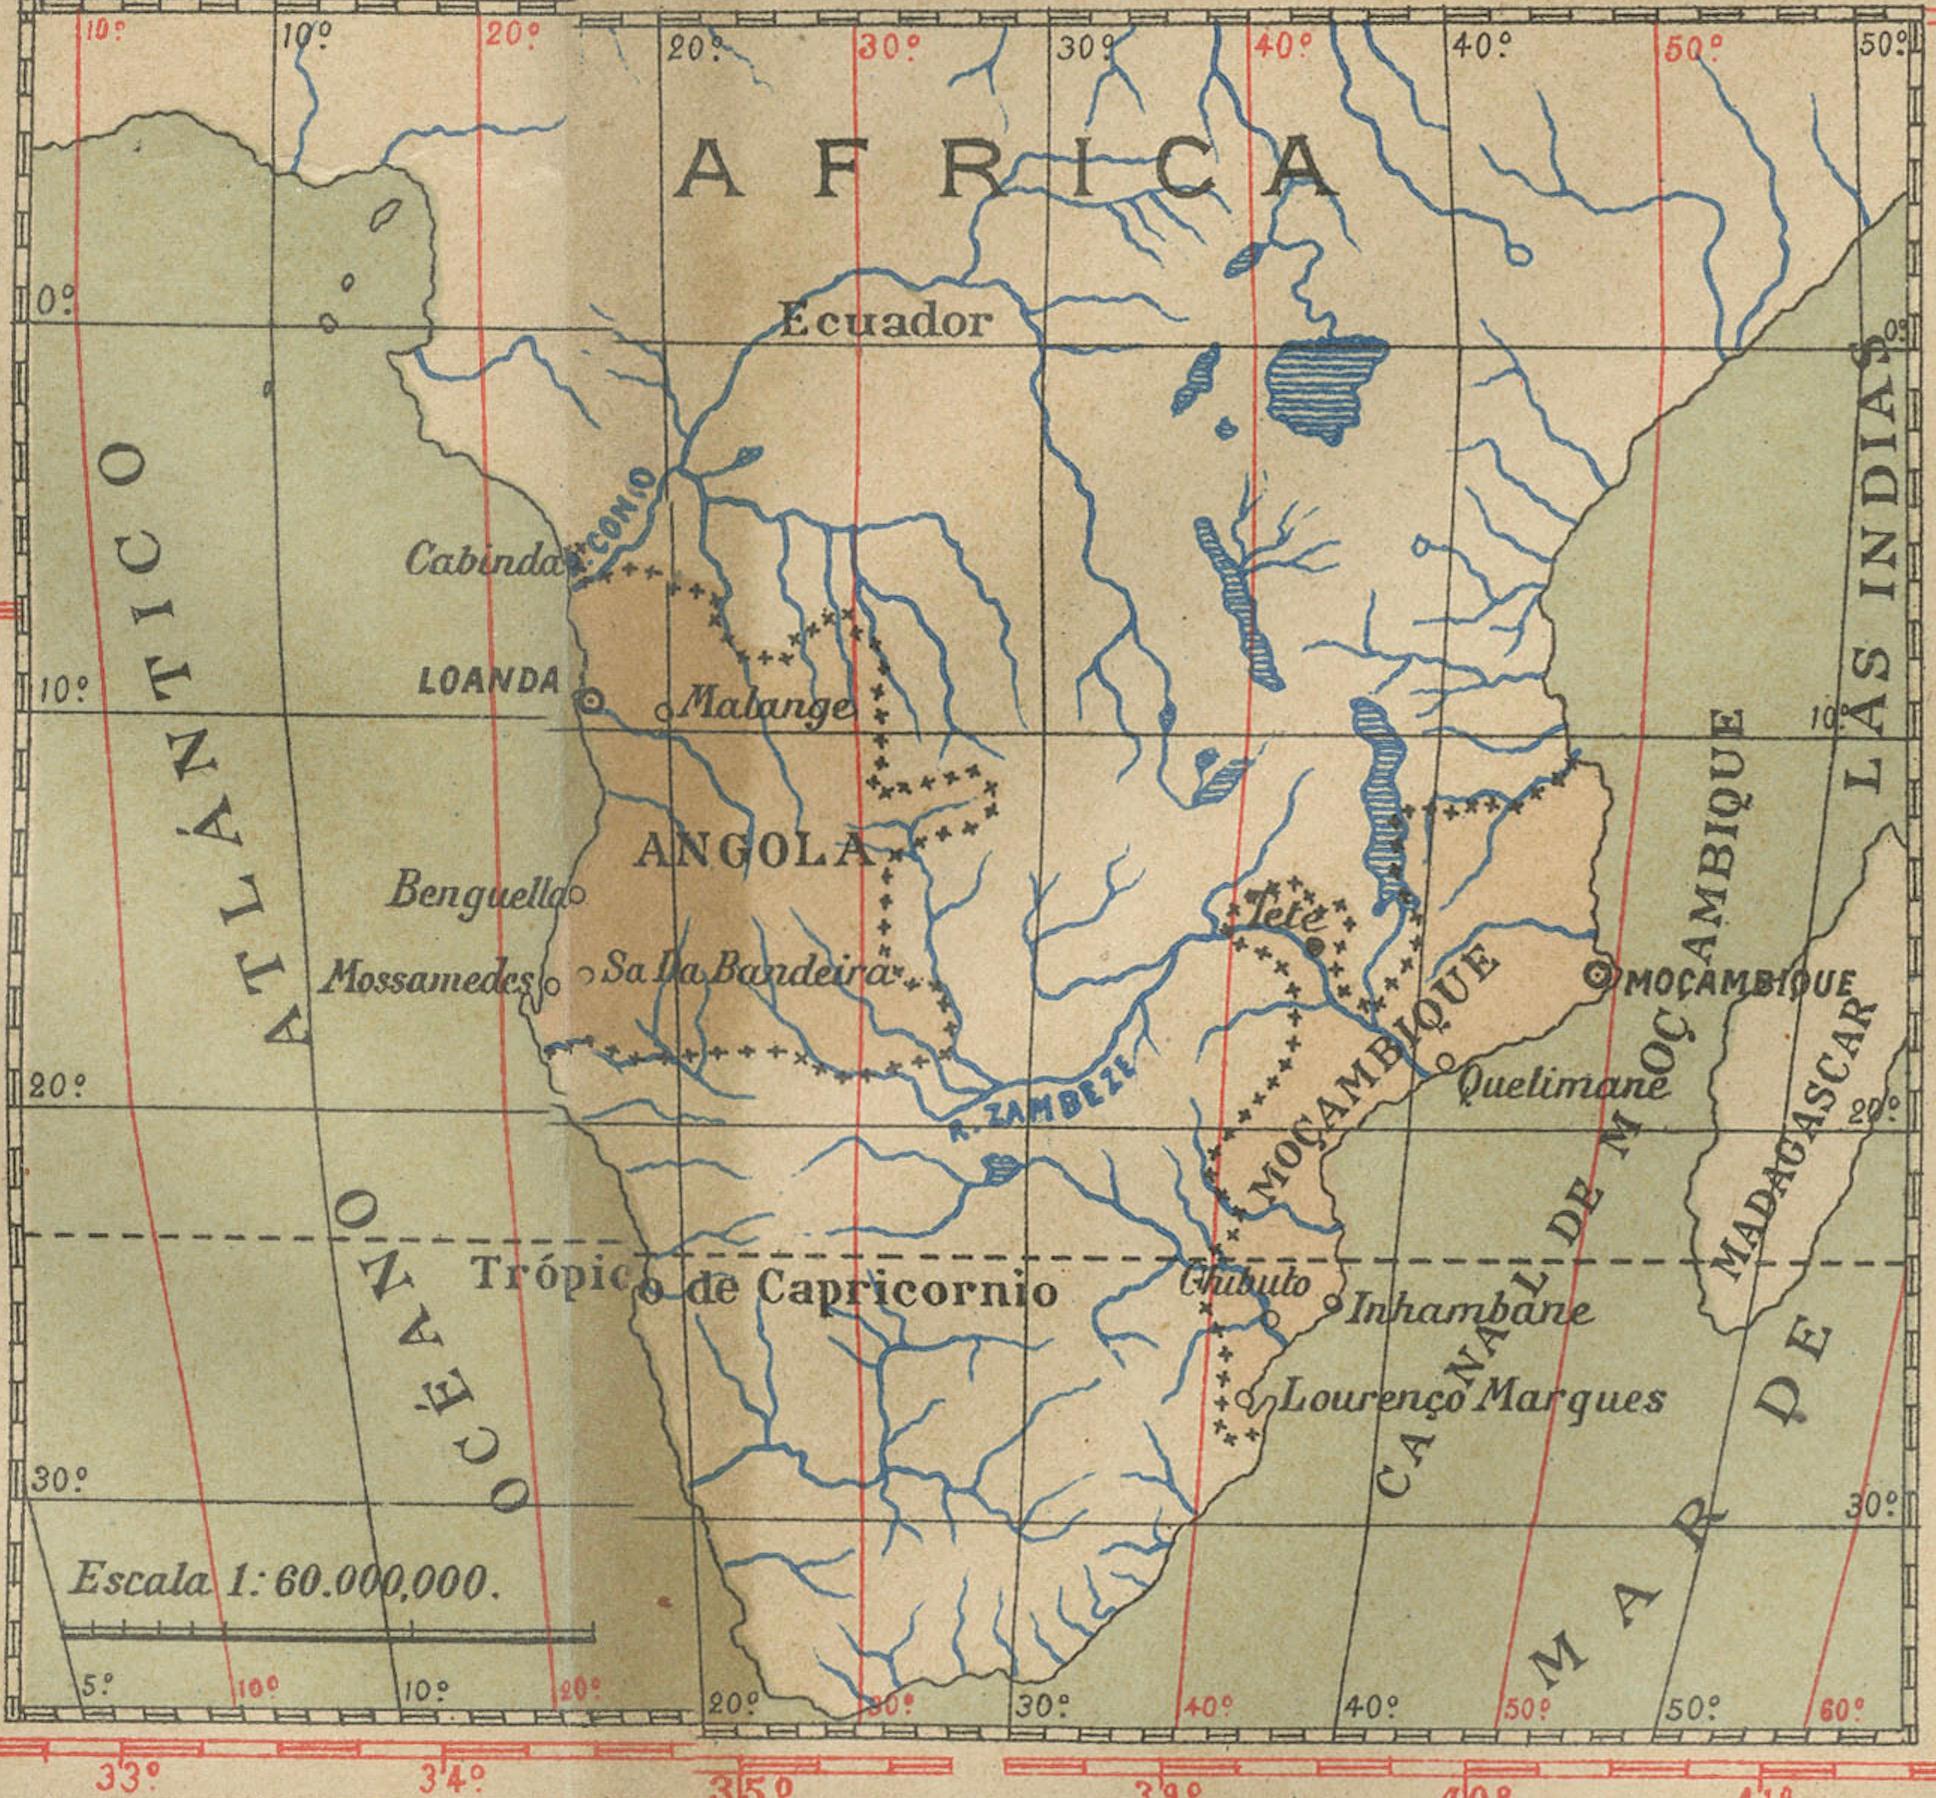 The image for sale is an original historical map from 1903 that shows the Portuguese colonies of Angola on the left and Mozambique on the right. These two territories on the African continent were major parts of Portugal's overseas empire.

Angola